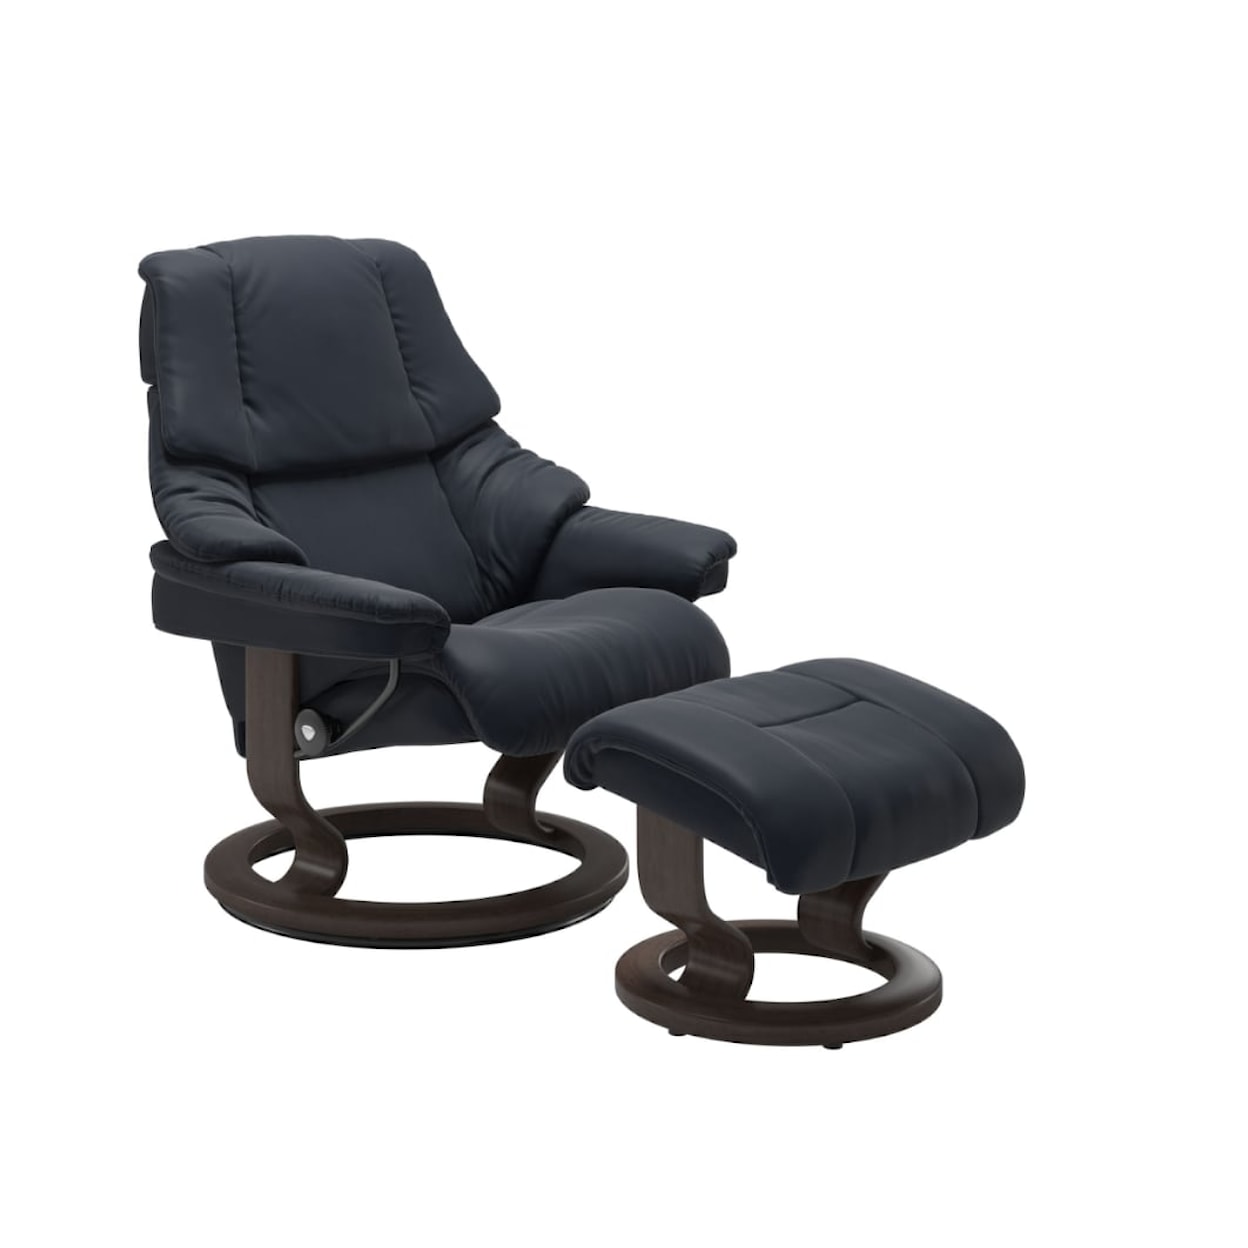 Stressless by Ekornes Reno Medium Chair & Ottoman with Classic Base